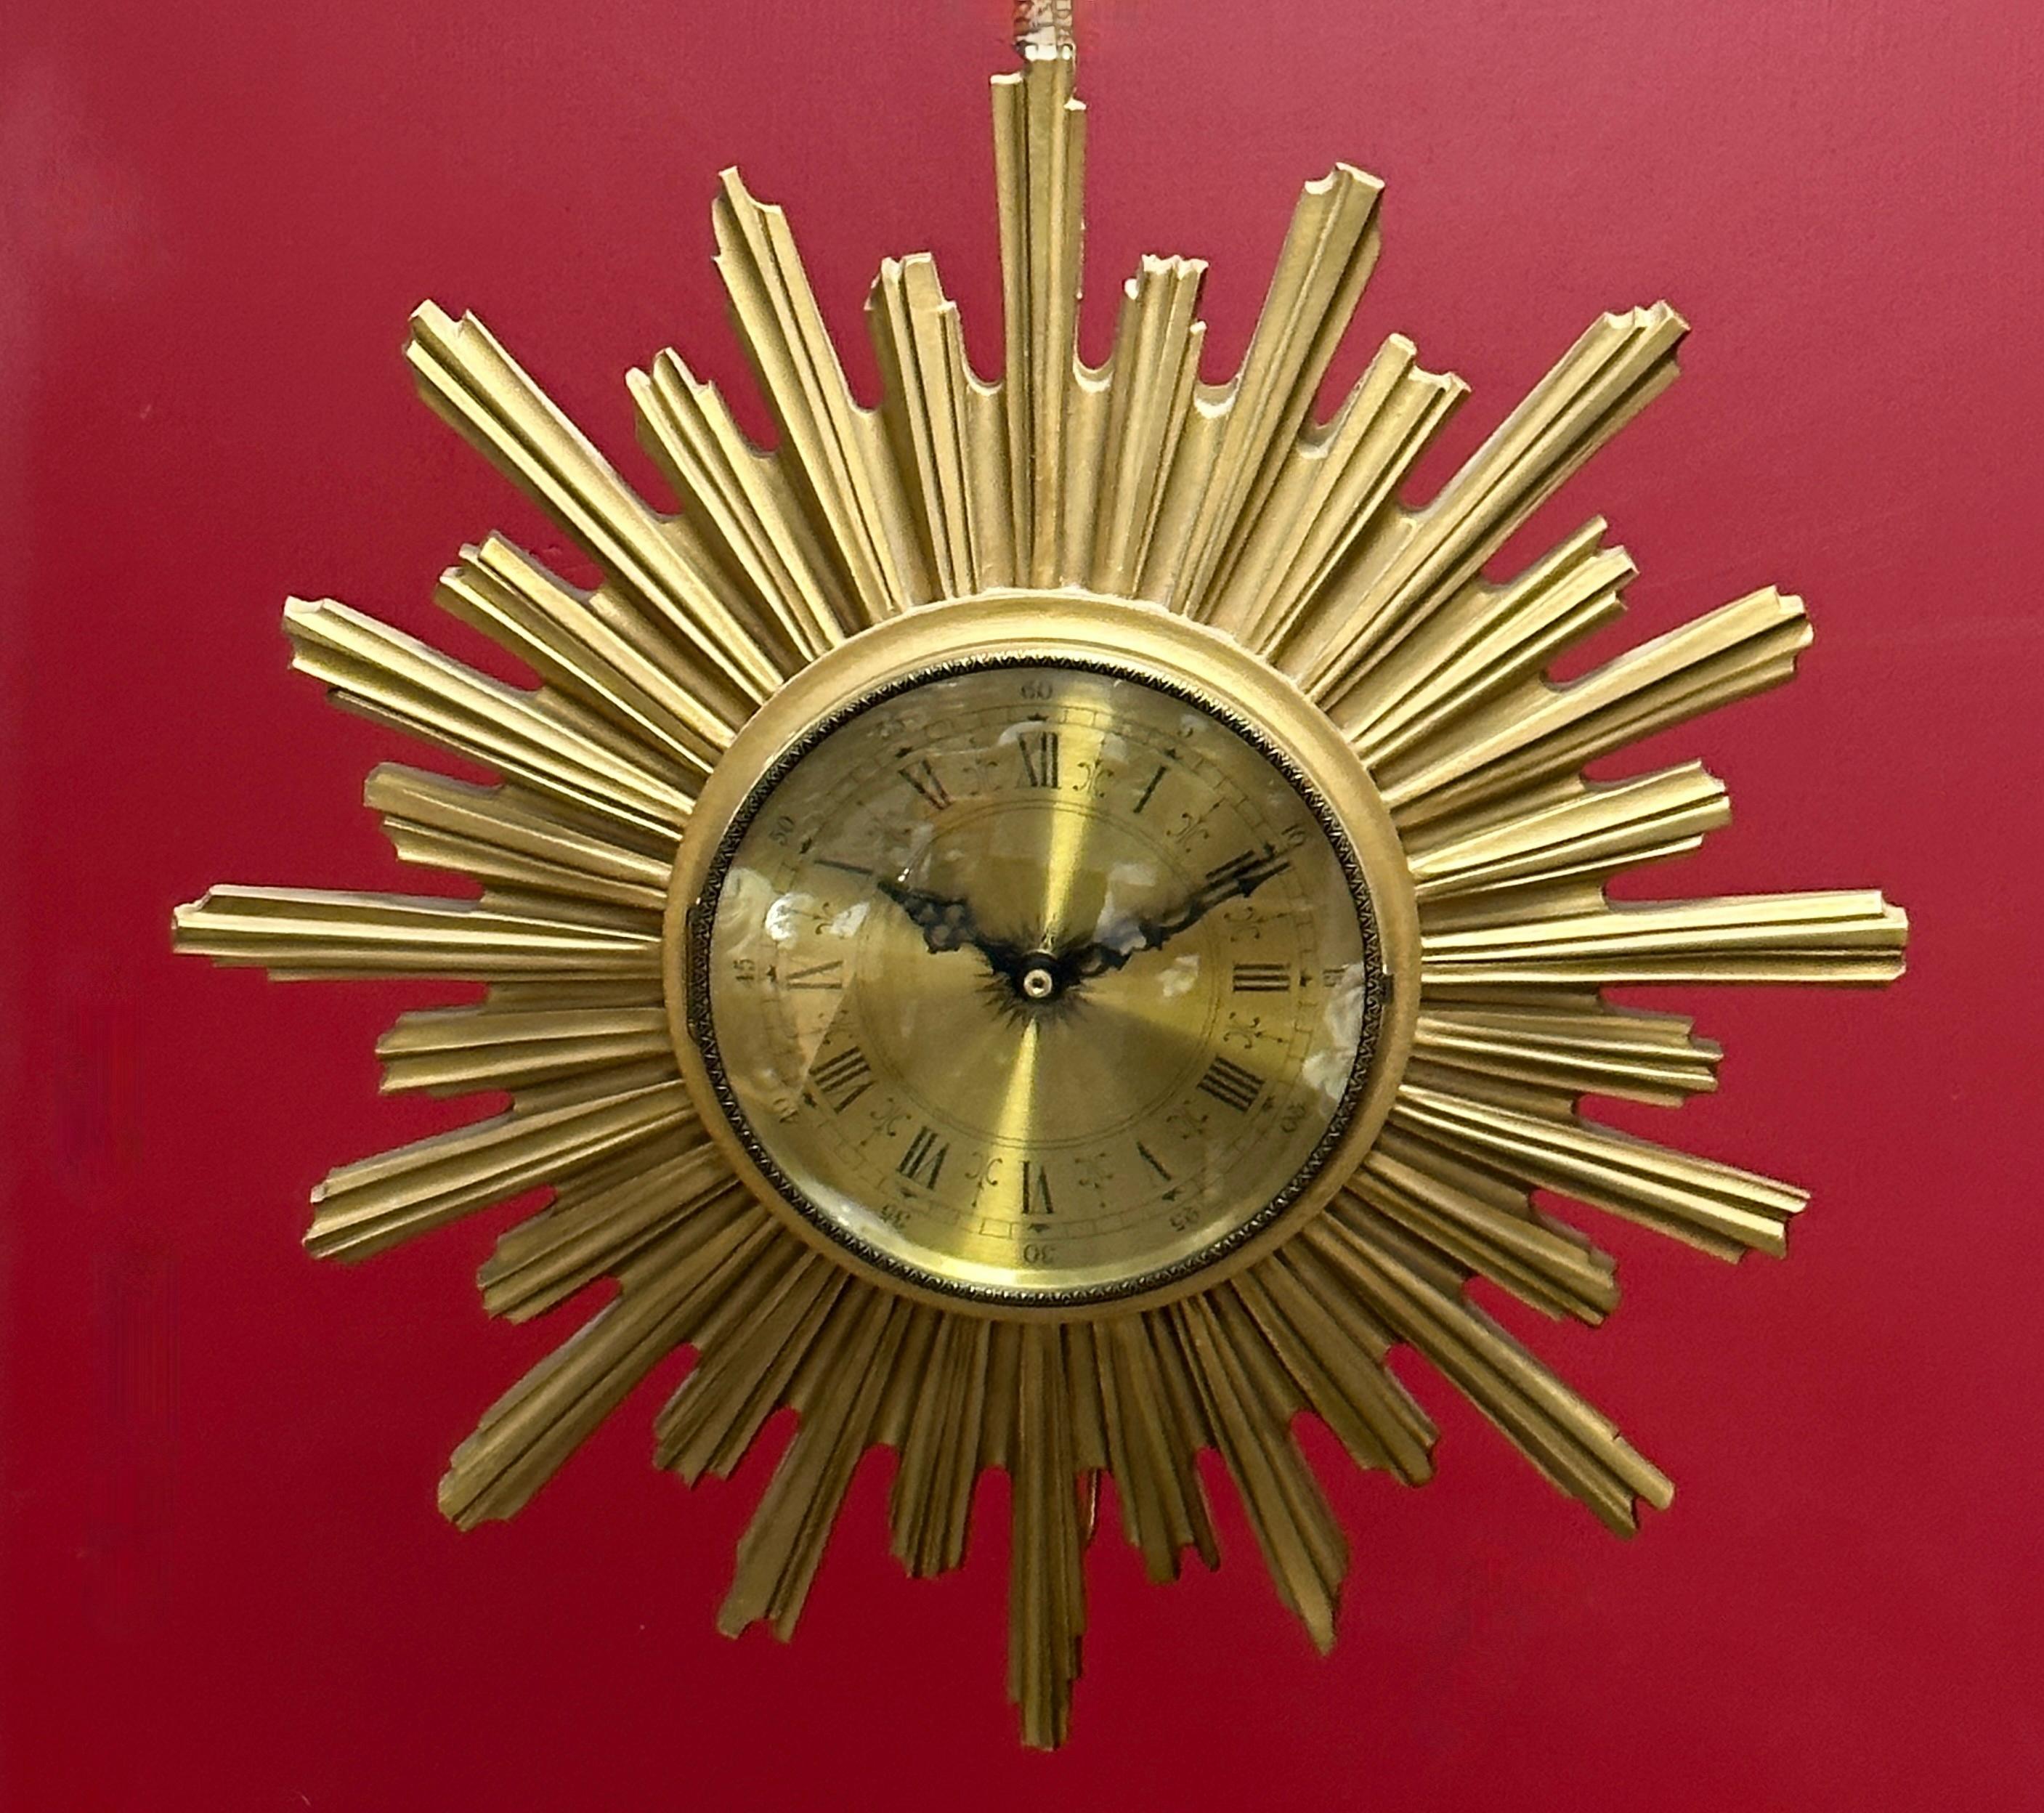 Stunning 1970s sunburst starburst Junghans wall clock. Made of heavy resin, gilded, with a junghans battery operated clockwork. working condition. Will look great on your wall. Nice working condition. Clock face itself is approx. 6.75 inches in